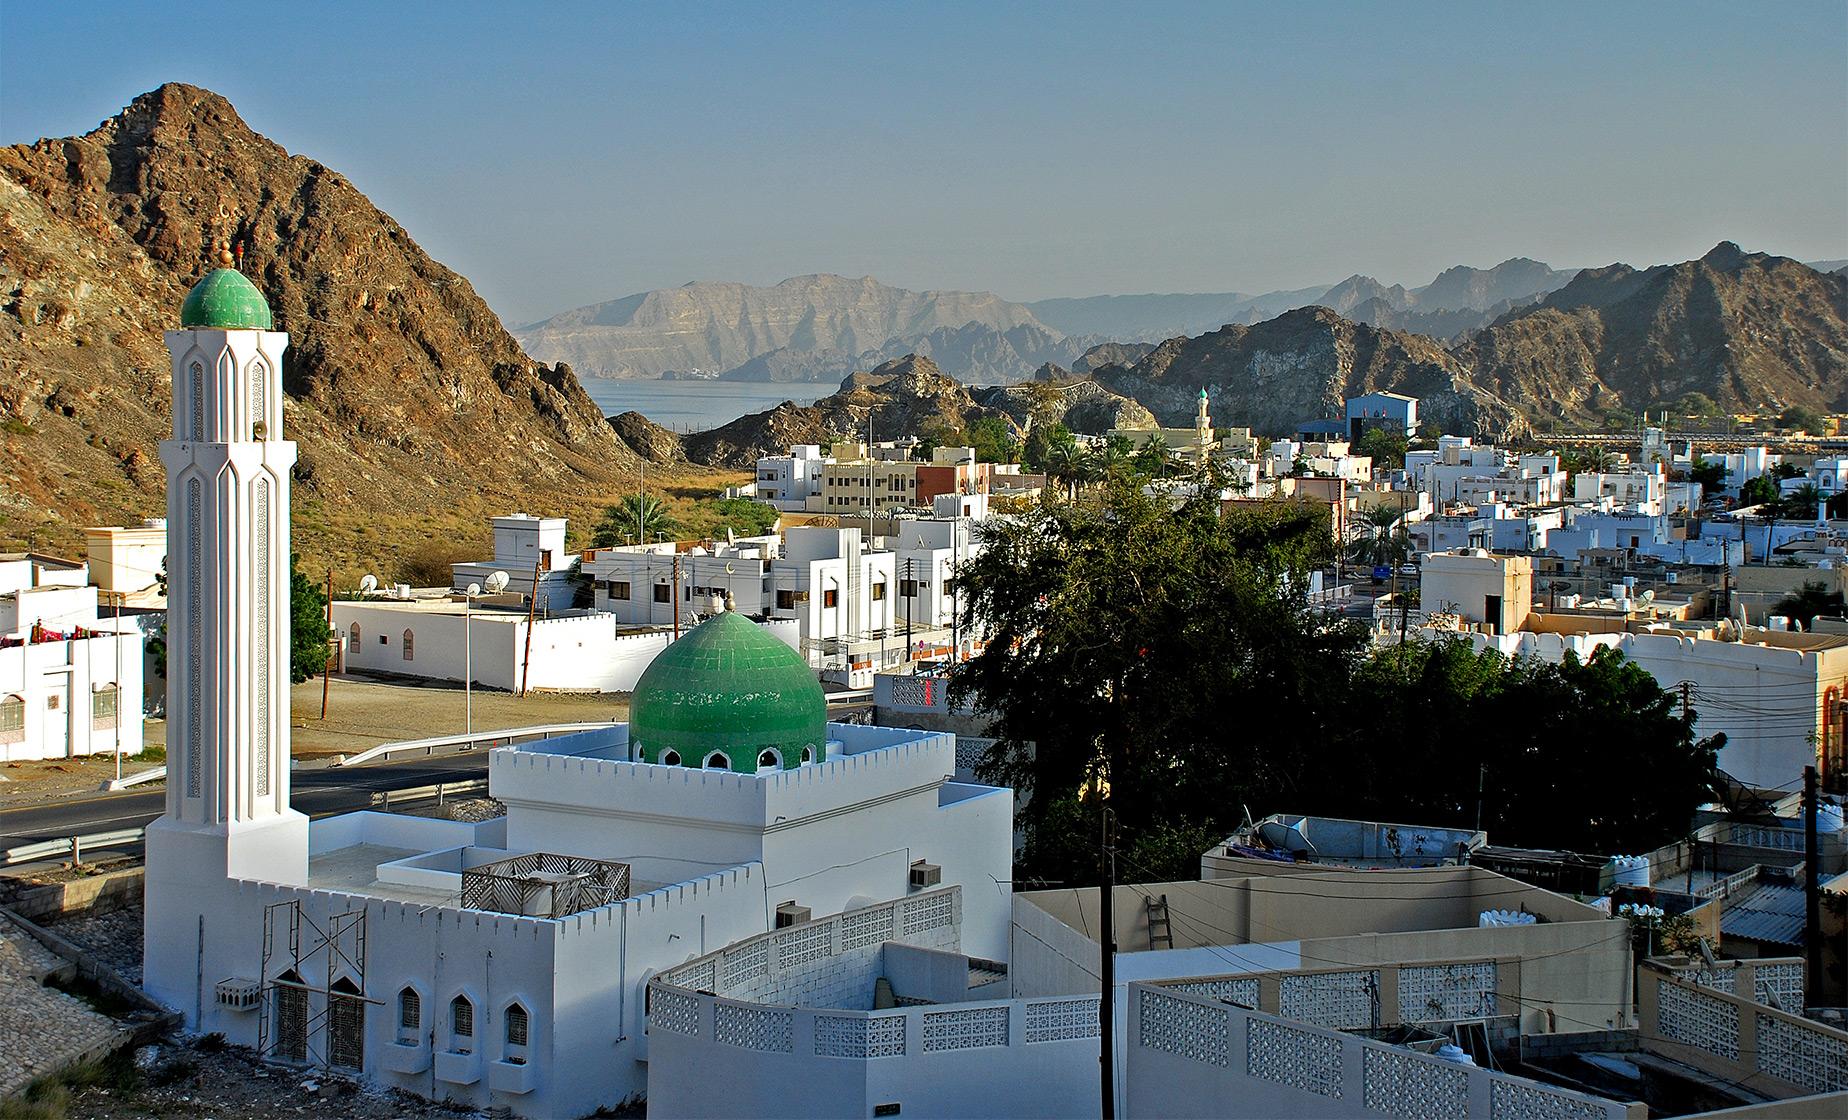 Muttrah Souk and fish market tour in Muscat